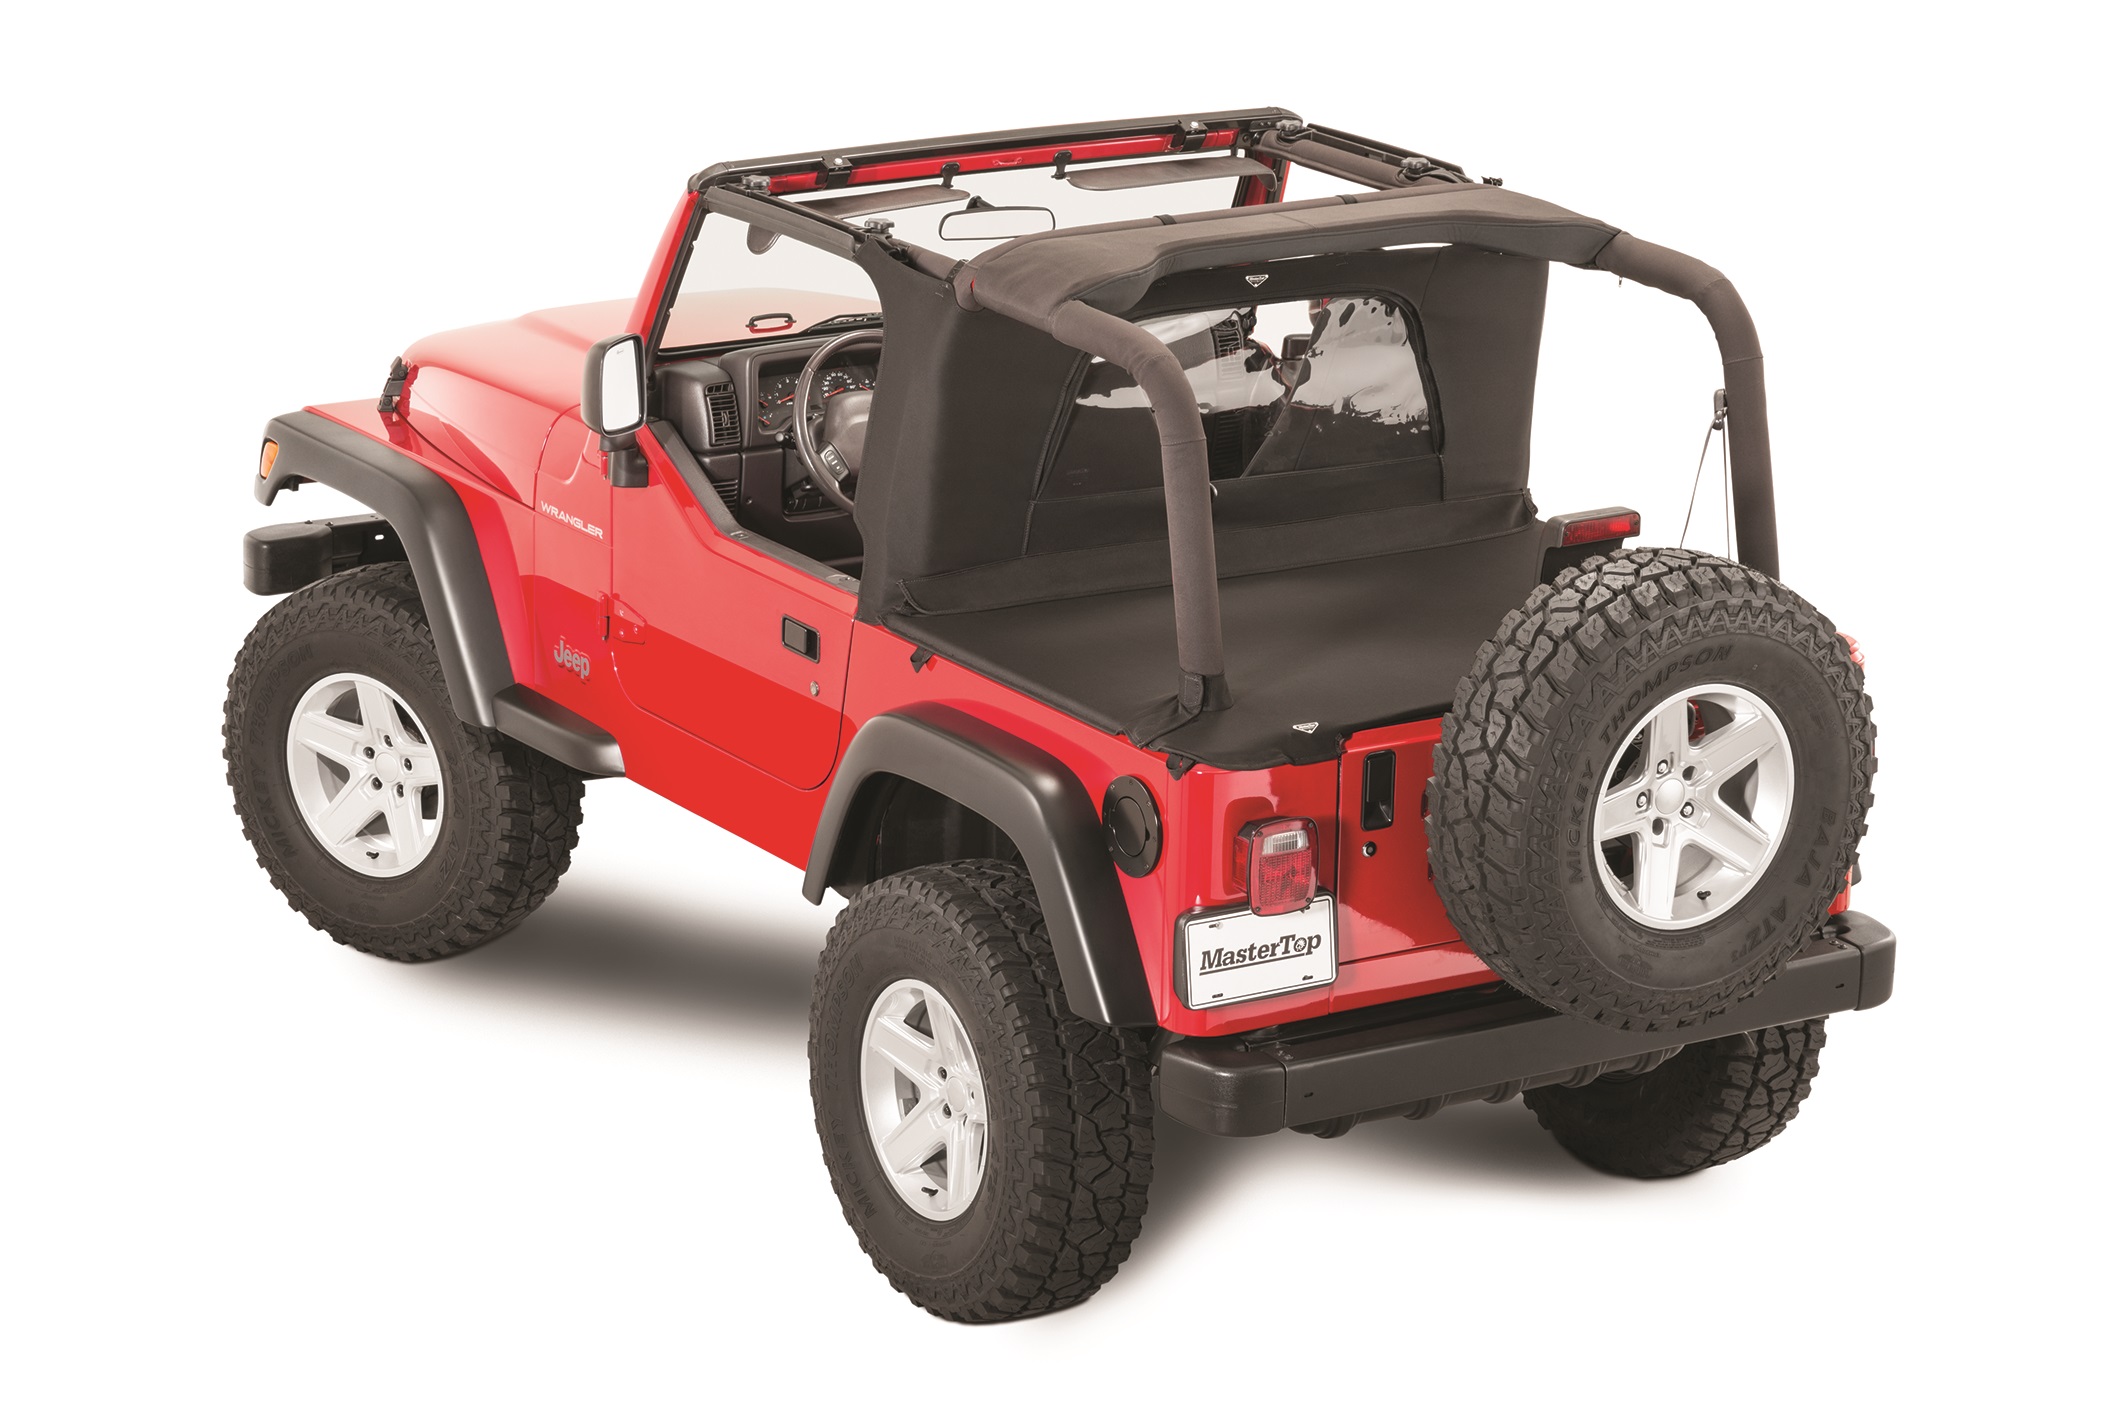 Jeep TJ Ultimate Soft Top Combo Bimini Top Plus For 04-06 Wrangler TJ  Unlimited WindStopper Plus and Tonneau MasterTop | Jeeperz Creeperz